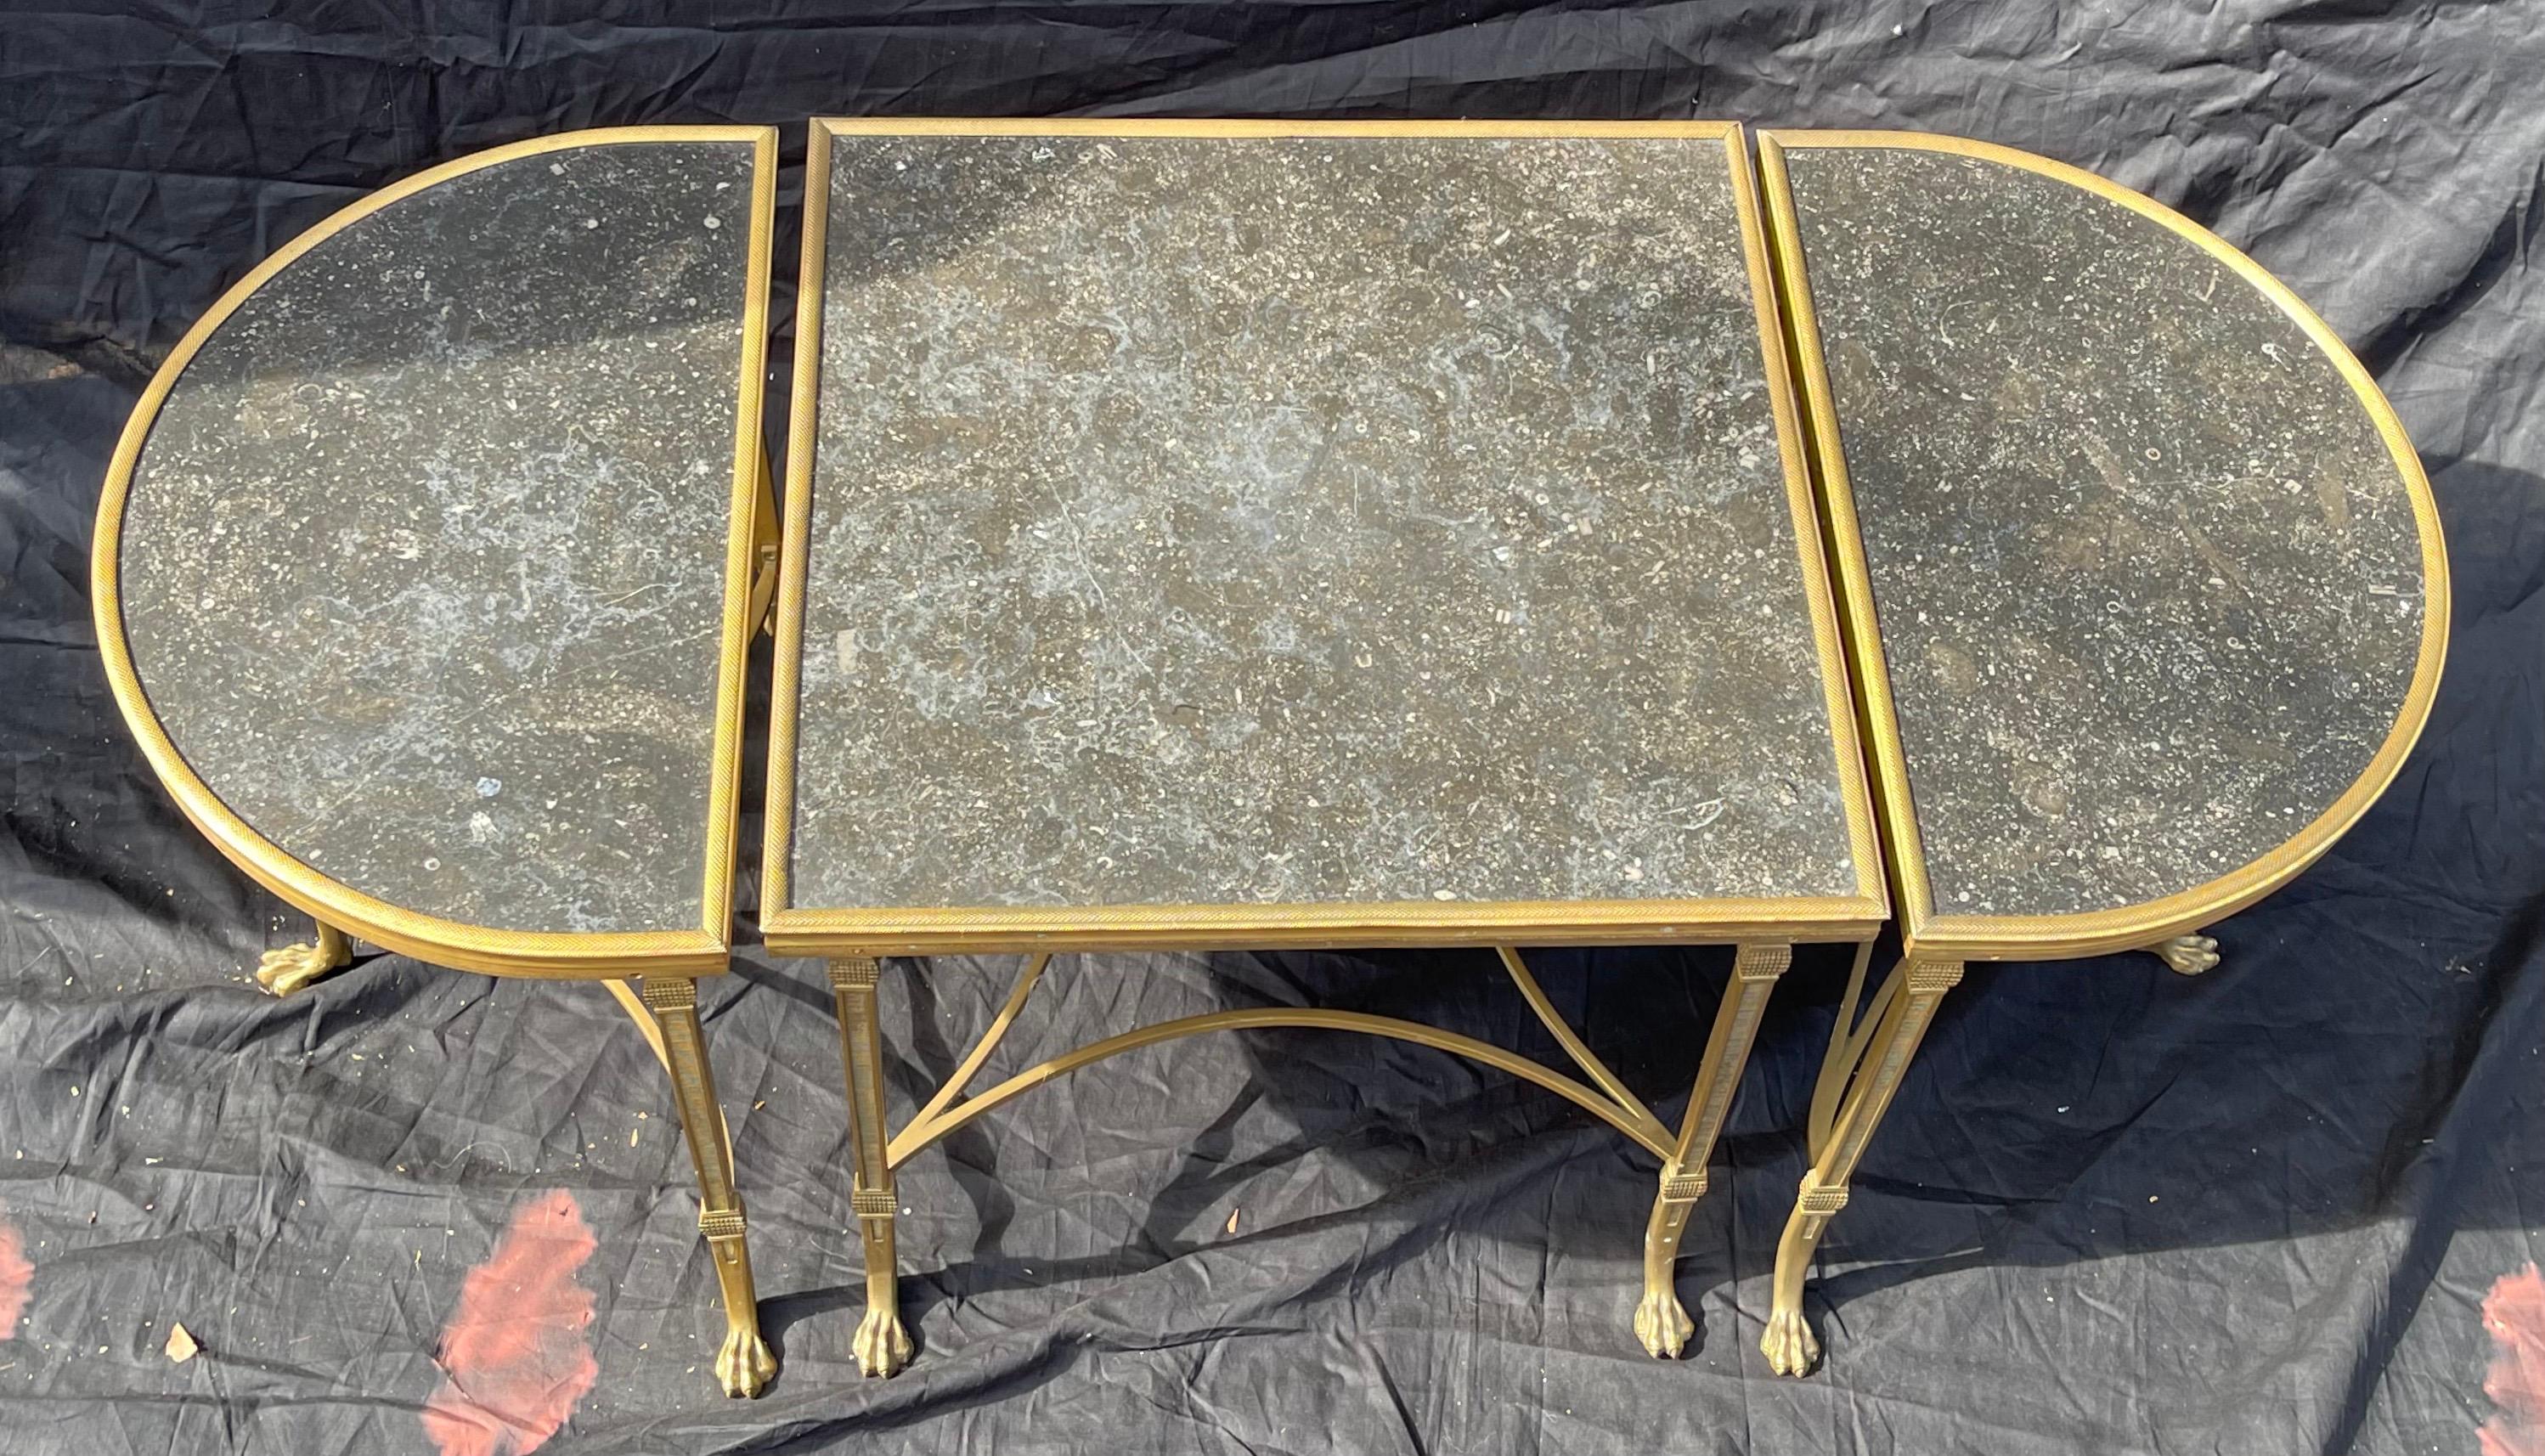 A wonderful French gilt bronze & black marble top three-part cocktail or coffee table with paw feet and stretchers across the bottom. Consisting of a square center sections and two rounded ends that are completely finished all the way around so that